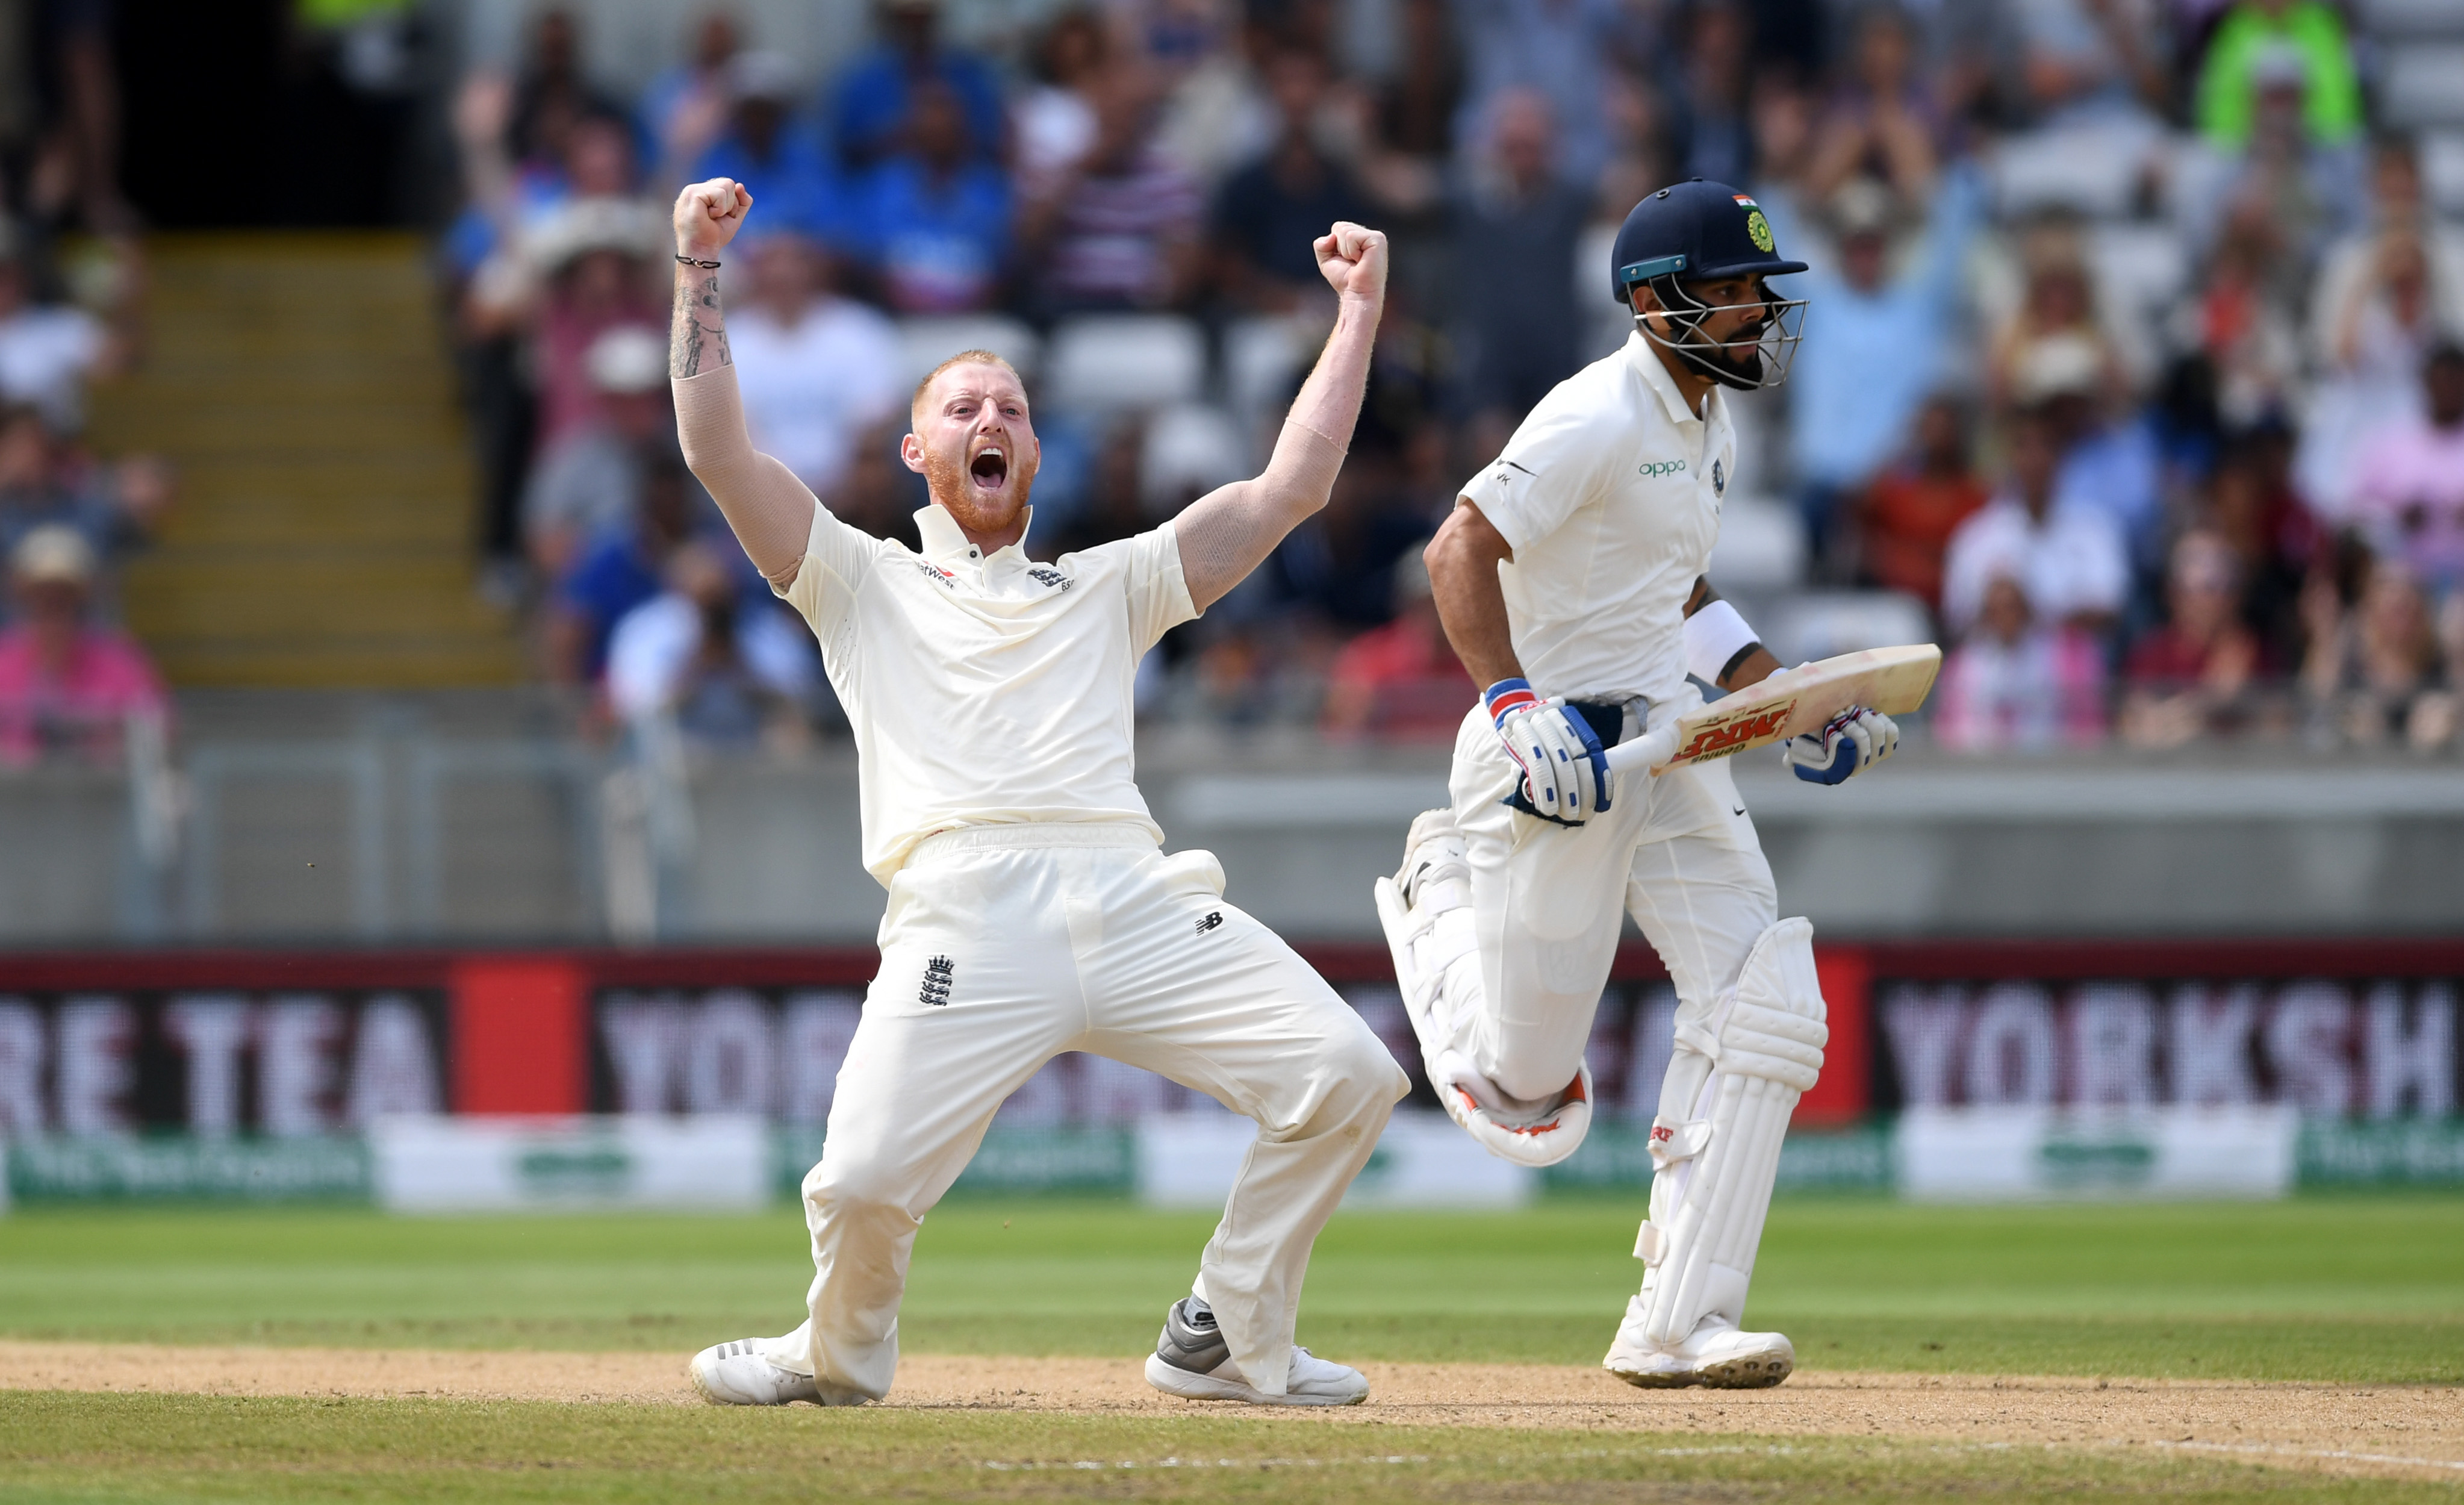 Ben Stokes is going to end up as England’s best ever, believes Dominic Cork